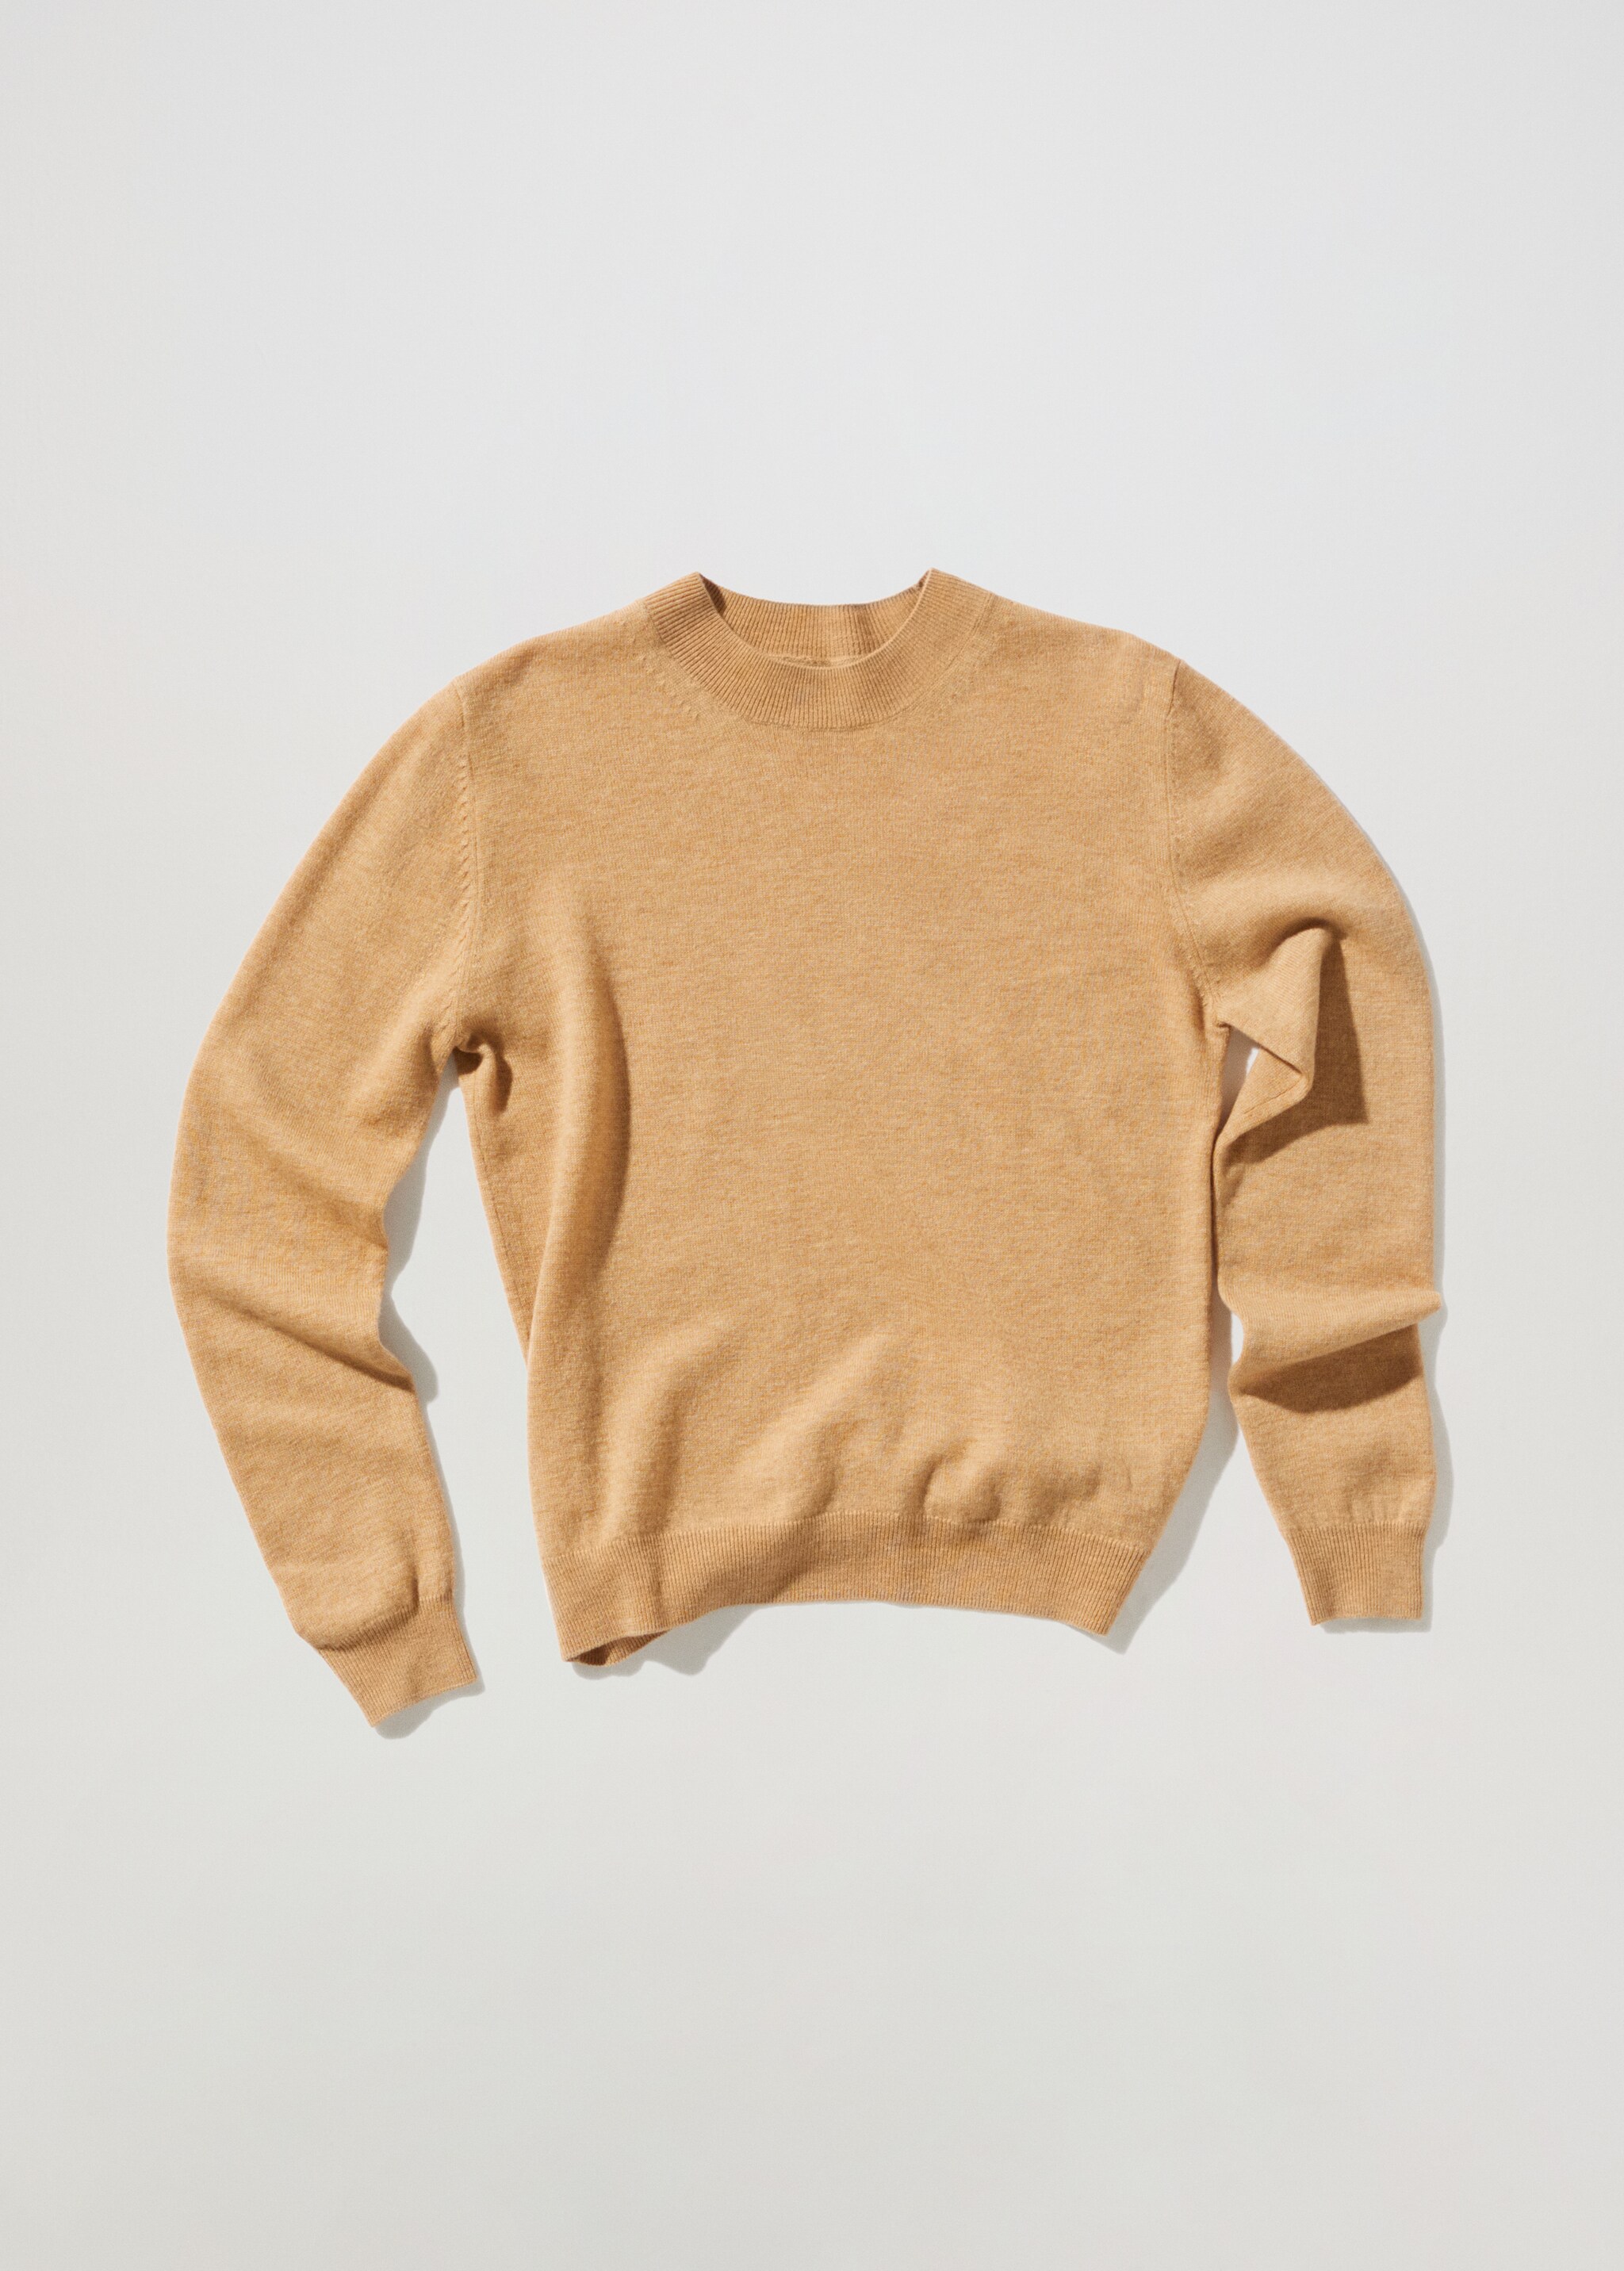 High collar wool sweater - Article without model